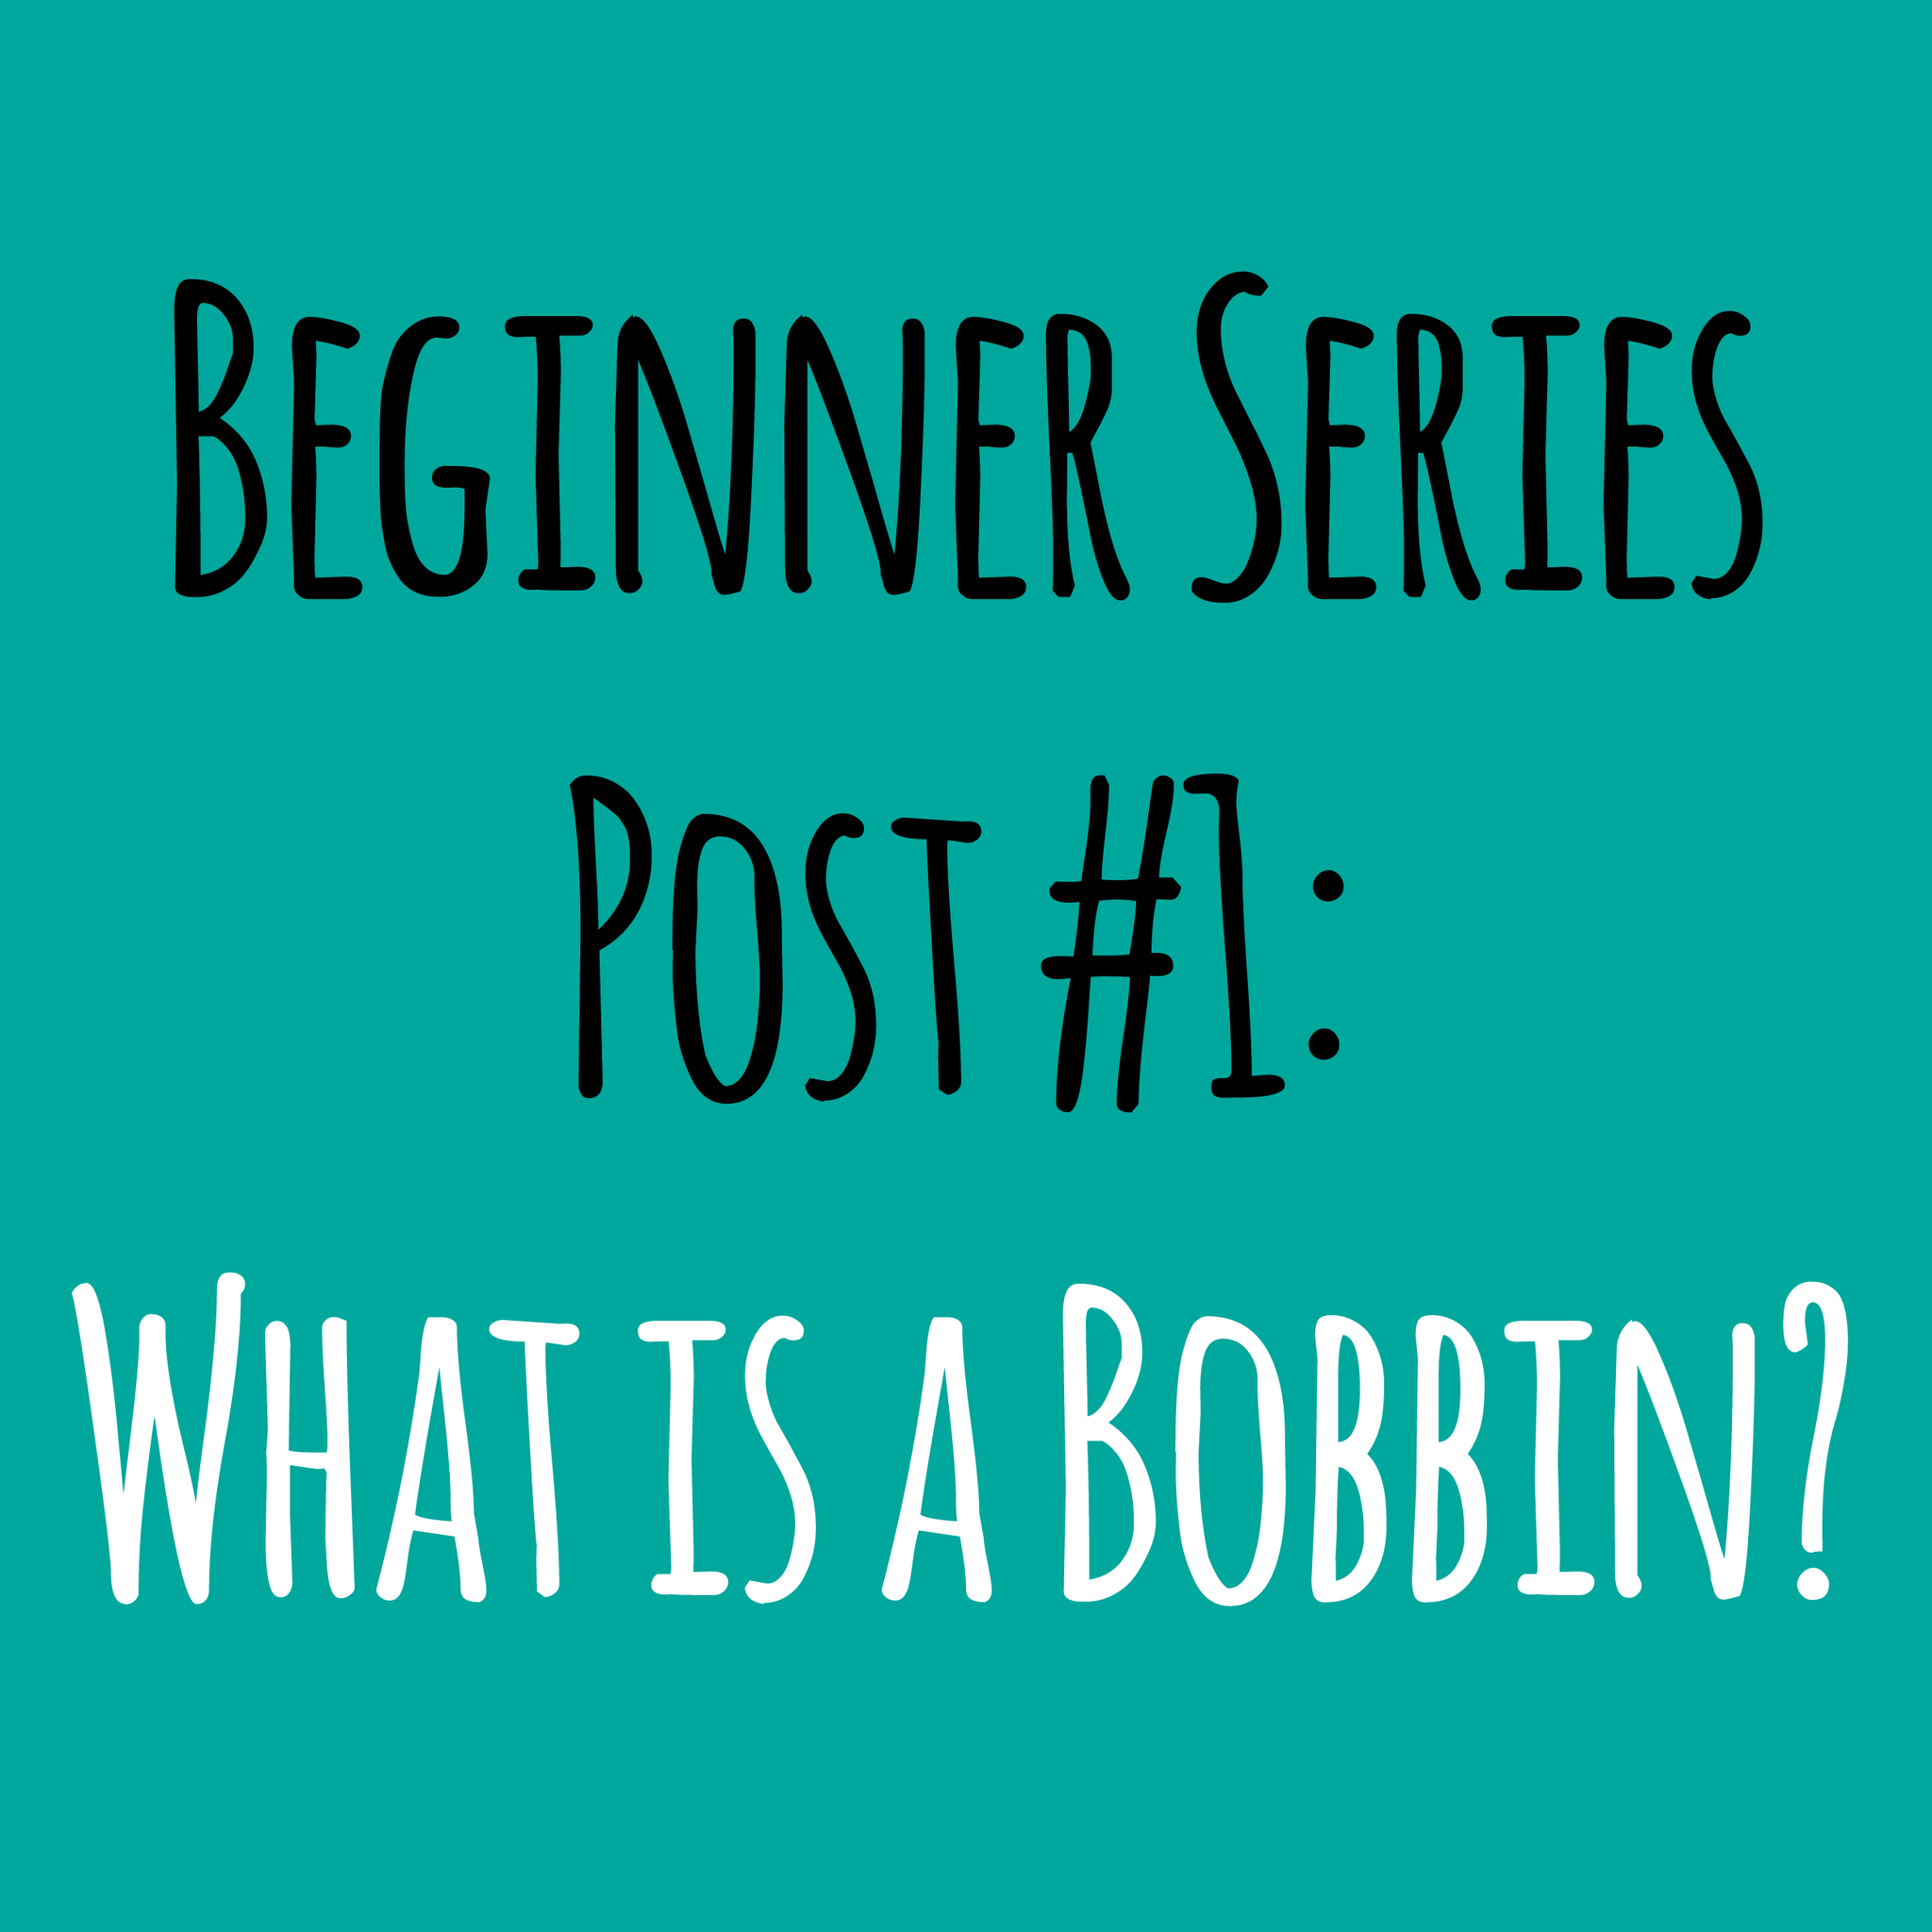 What is a bobbin?